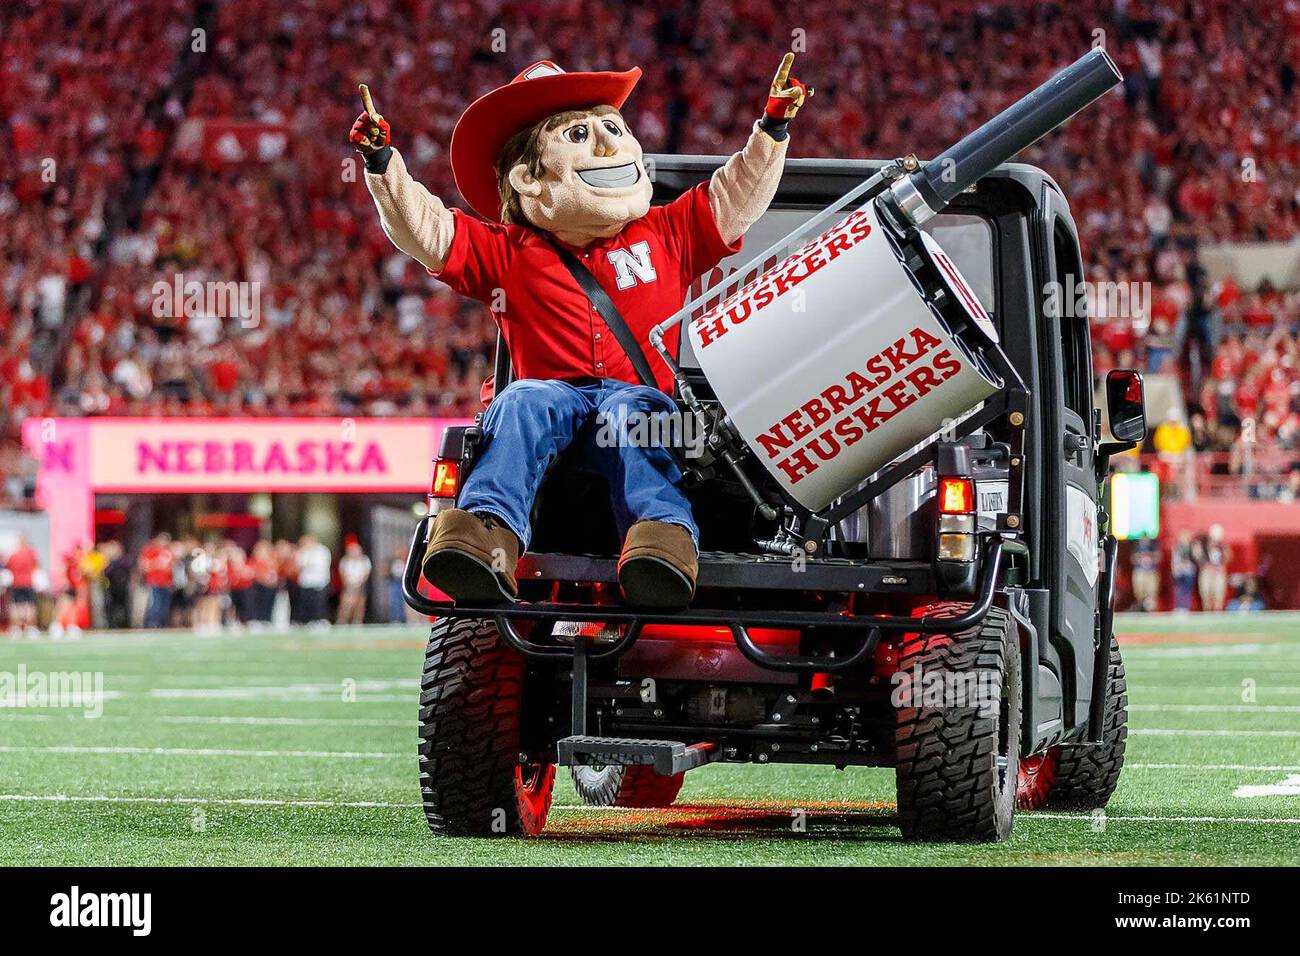 October 01, 2022 - Lincoln, NE. U.S. During a break in the action, Nebraska Cornhuskers mascot Herbie Husker rides around the field in a UTV during a NCAA Division 1 football game between Indiana Hoosiers and the Nebraska Cornhuskers at Memorial Stadium in Lincoln, NE. .Nebraska won 35-21.Attendance: 86,804.386th consecutive sellout.Michael Spomer/Cal Sport Media Stock Photo